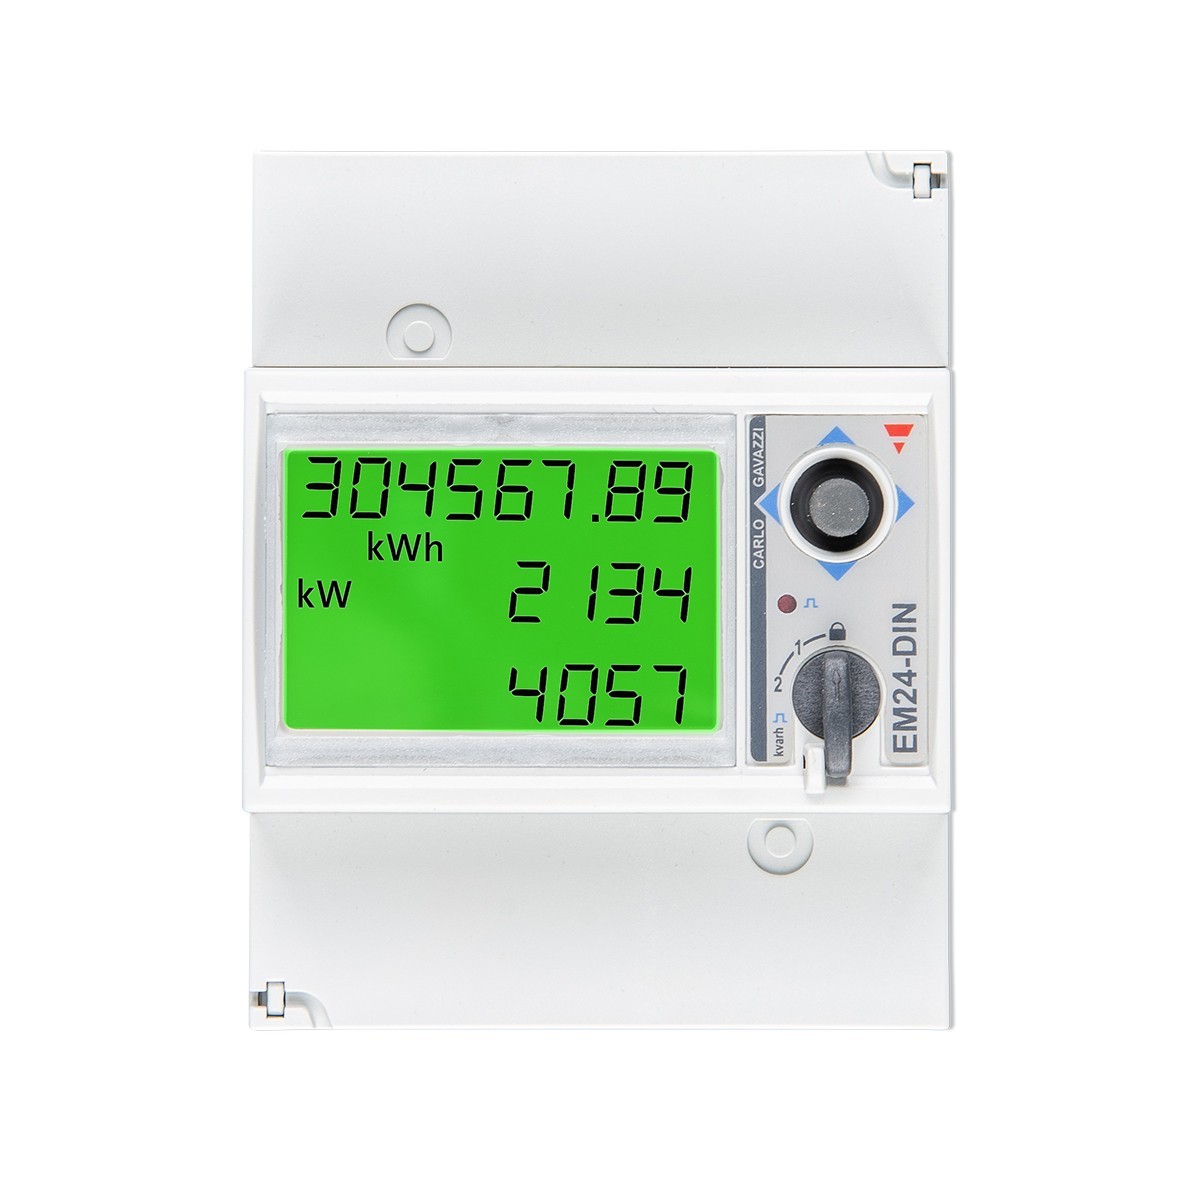 Energy Meter EM24 - 3 phase - max 65 A/phase with Ethernet port